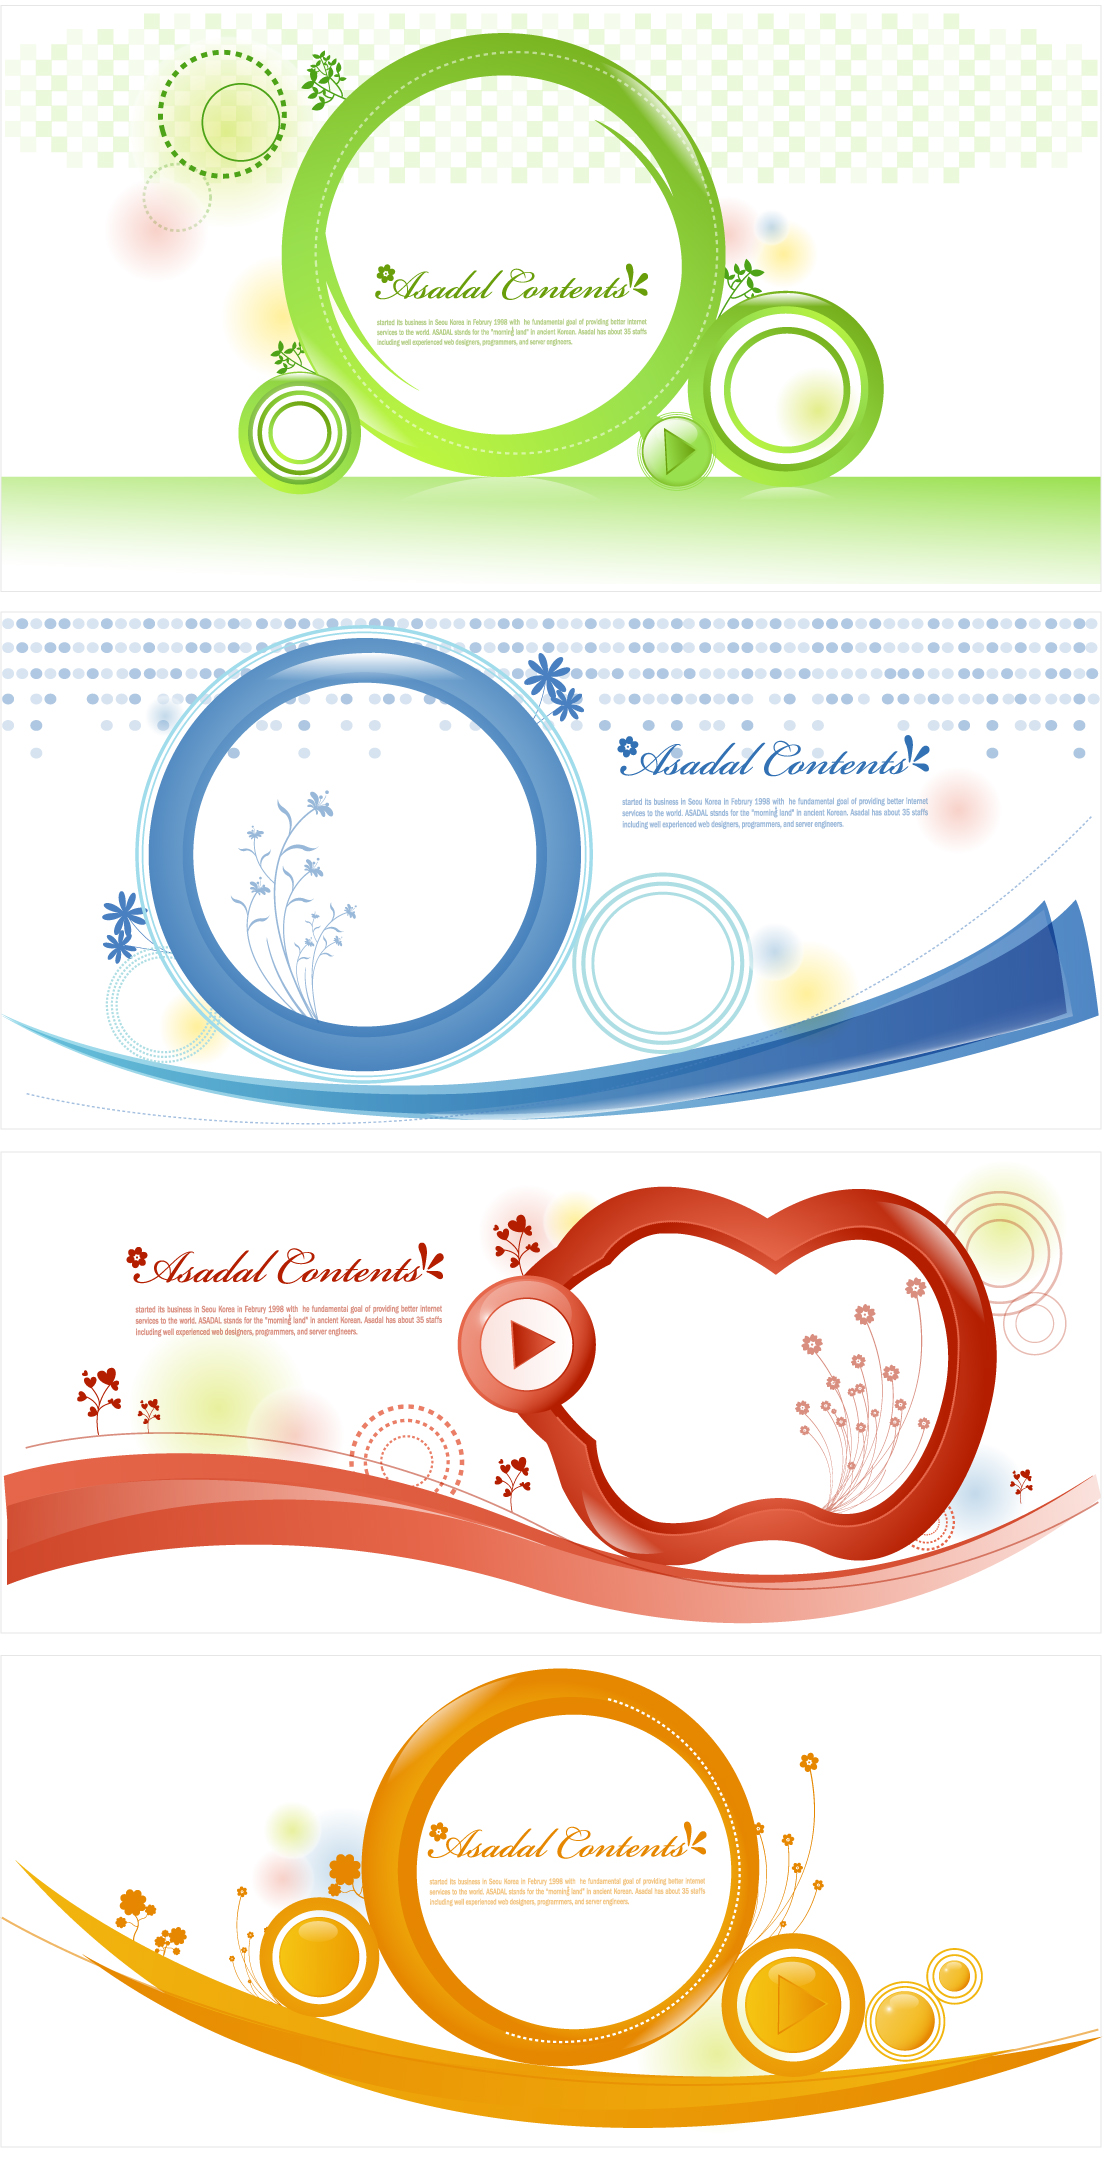 free vector graphics download – Clipart Free Download